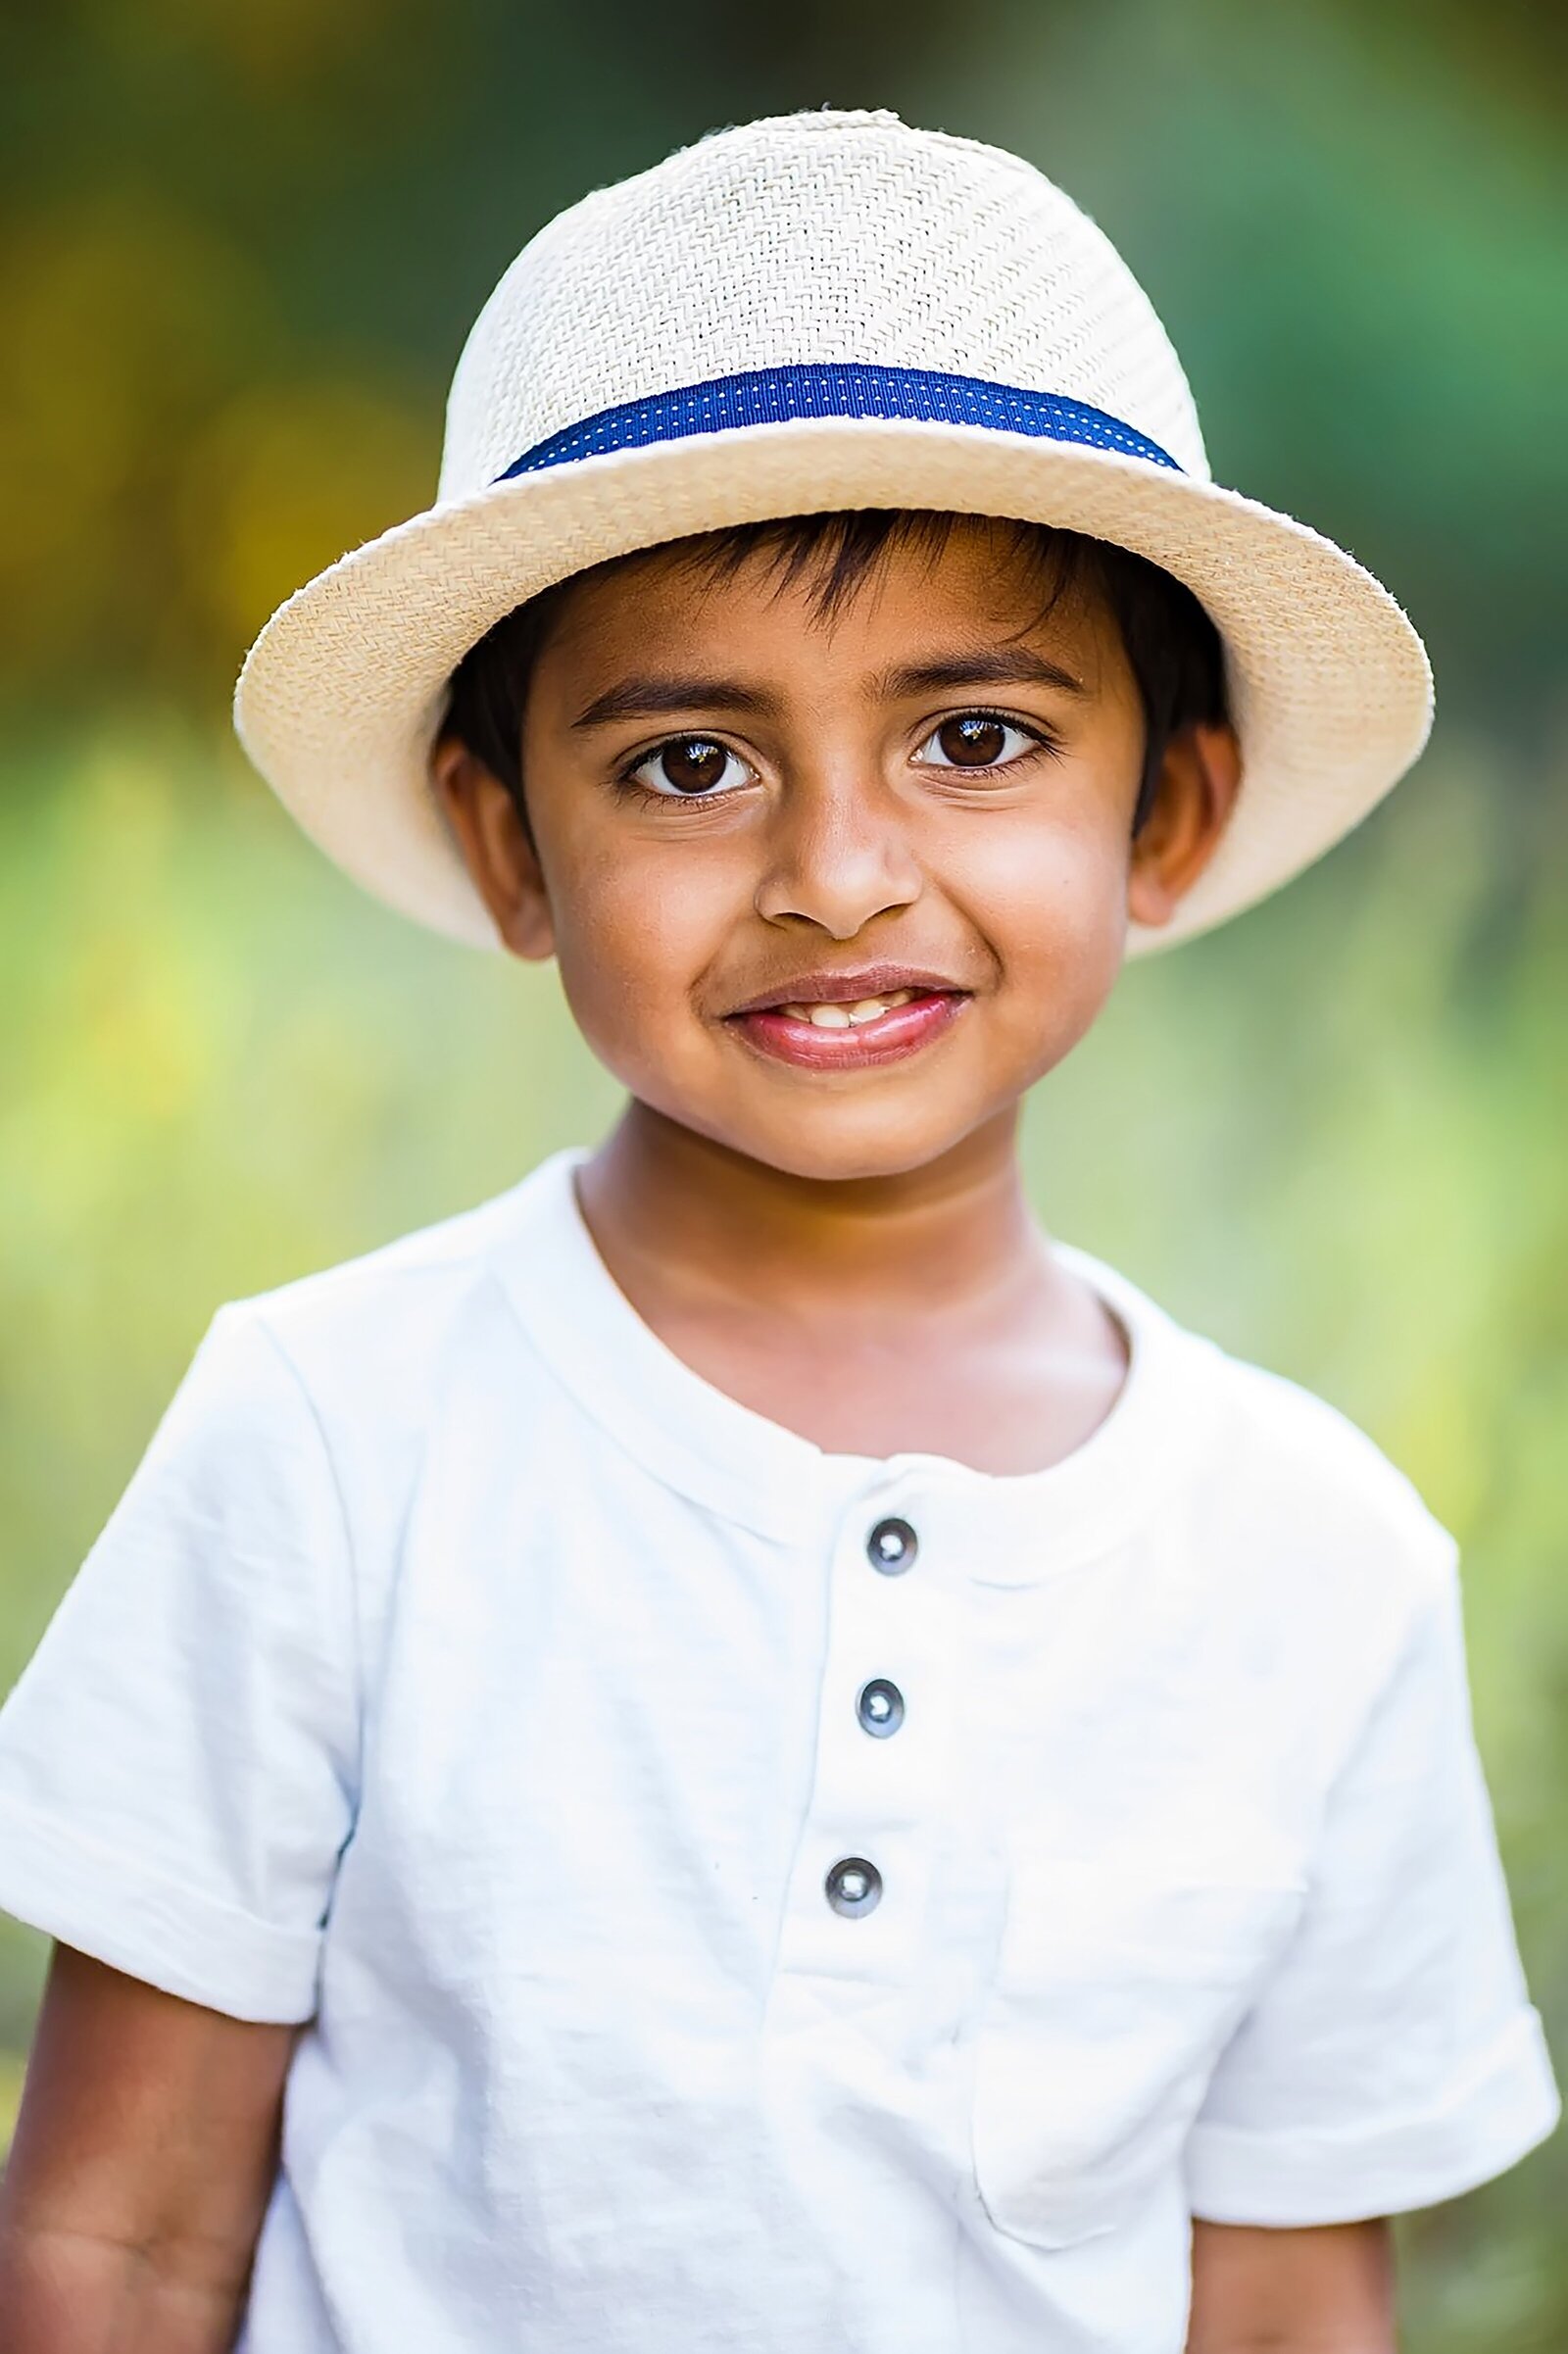 young boy smiling in a field and wearing a hat